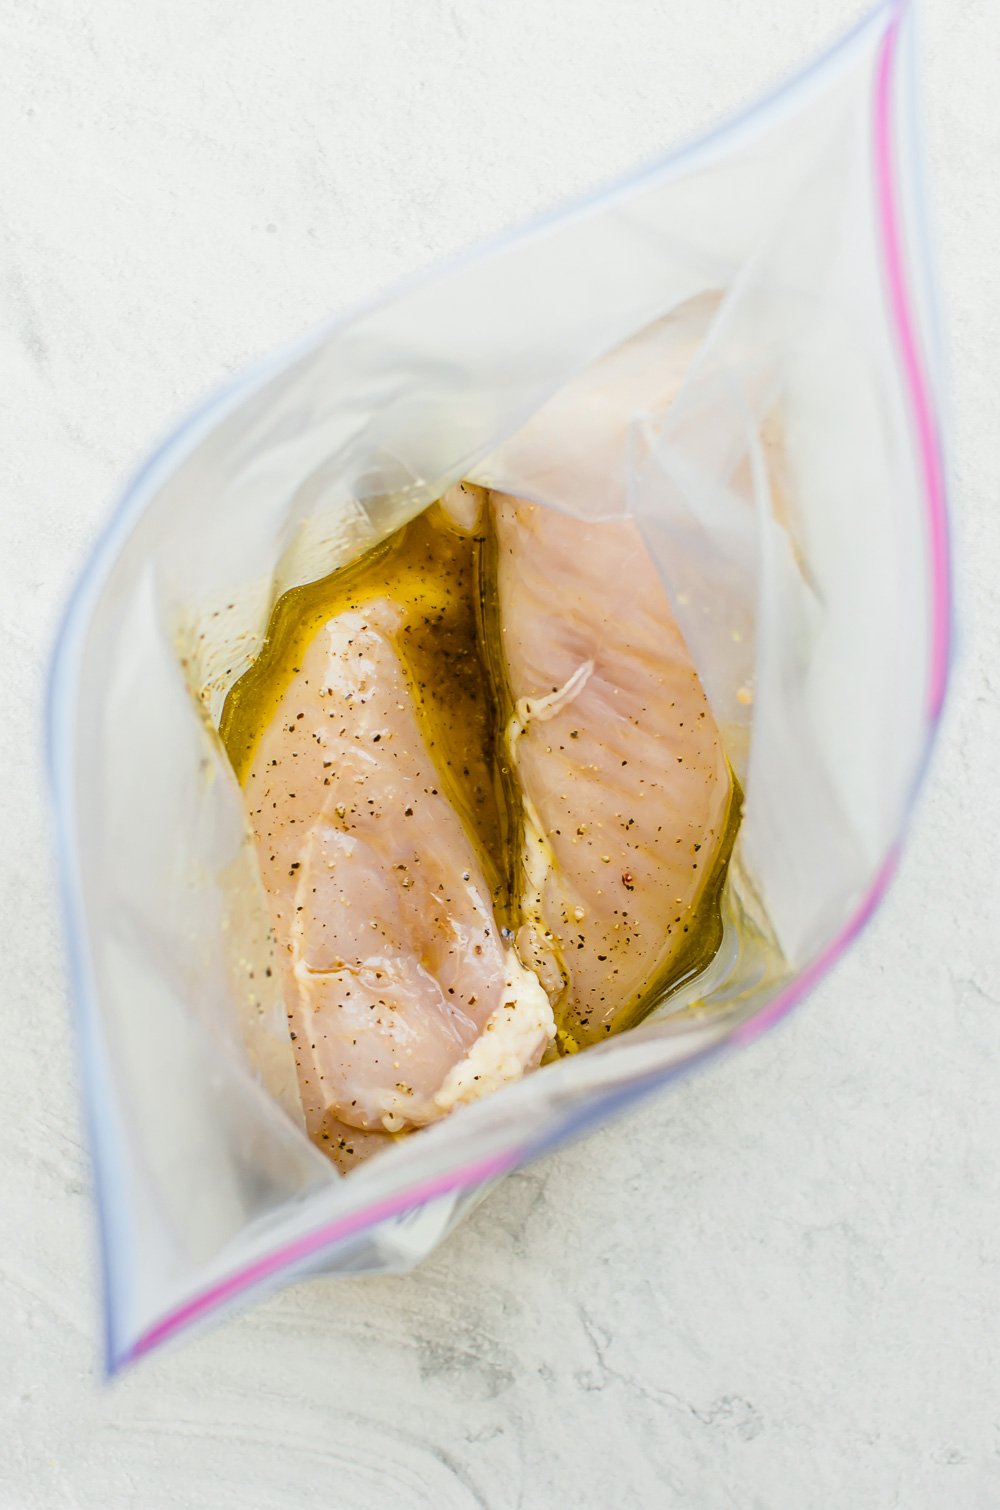 Savory chicken marinade in a freezer bag with chicken breasts.